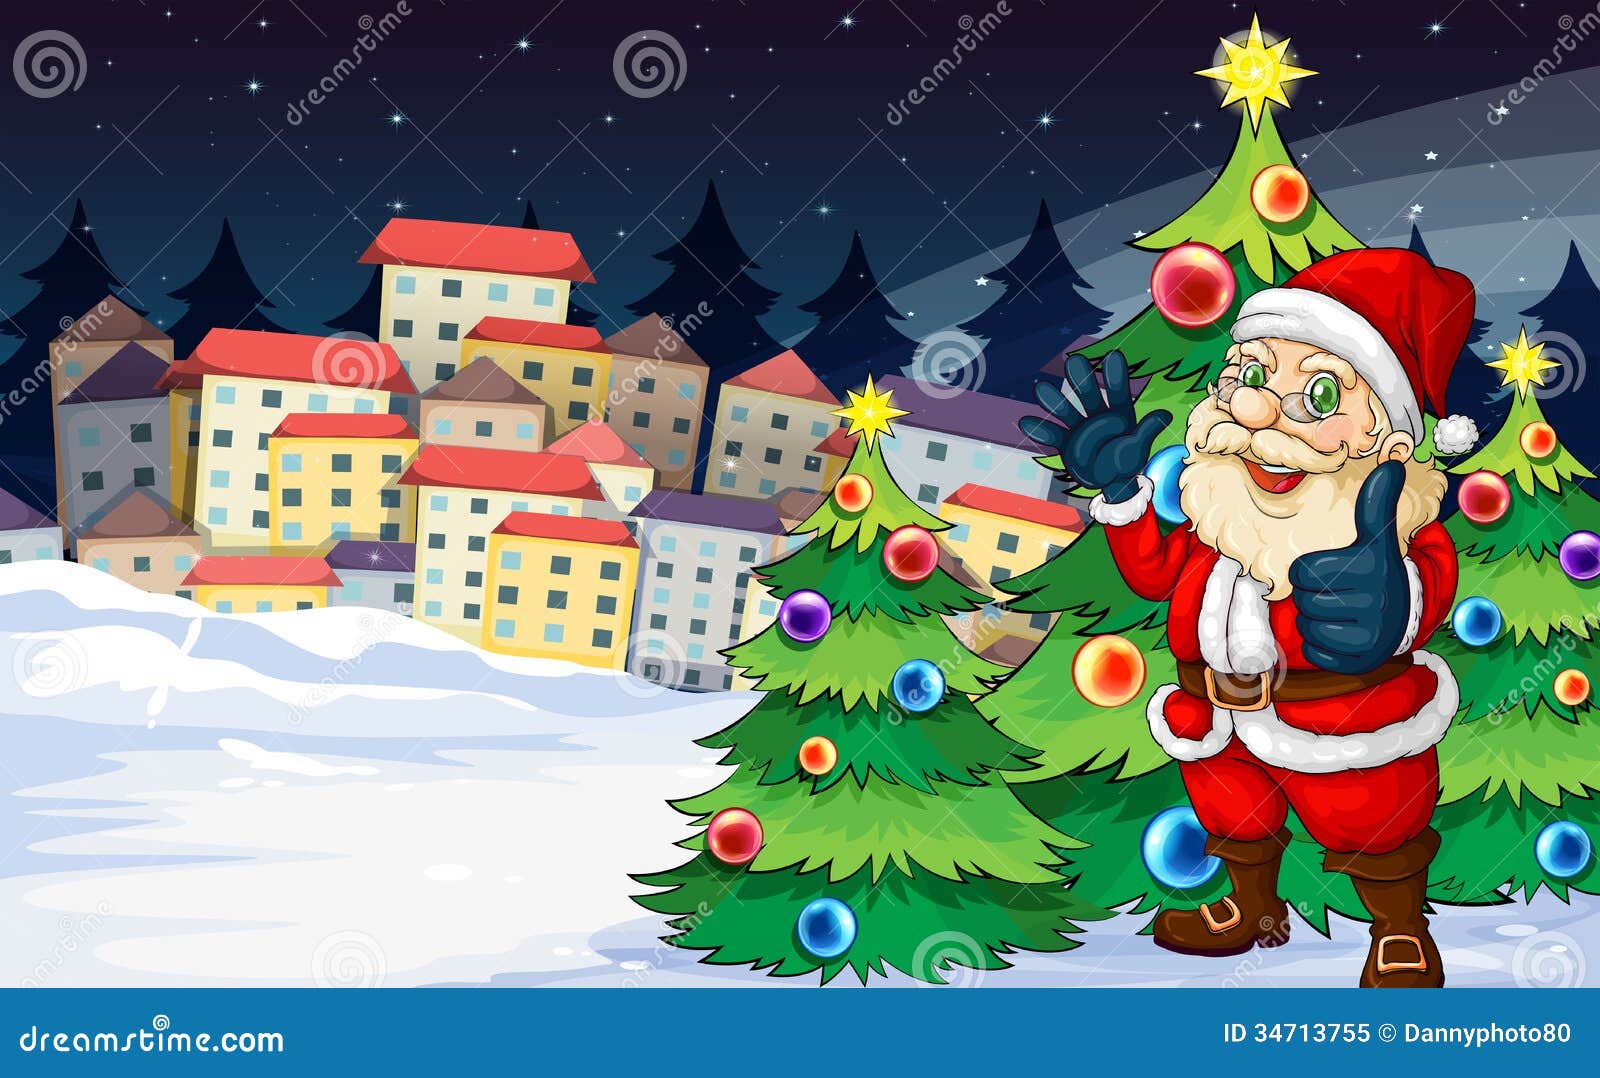 How To Wiki 89 How To Draw Santa Claus And Christmas Tree